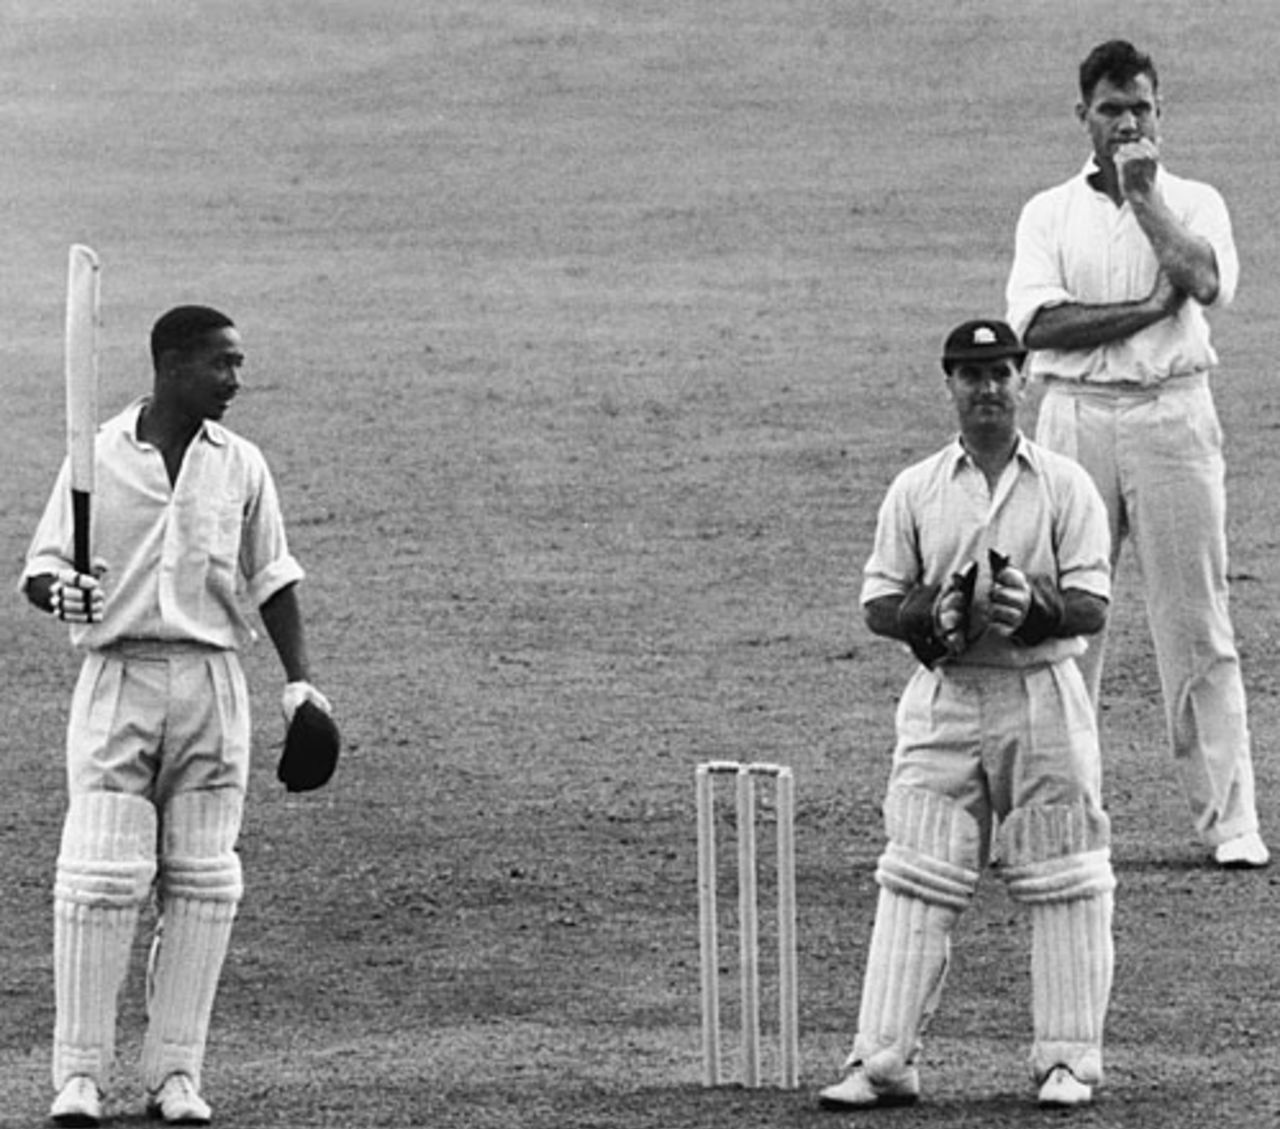 Frank Worrell raises the bat after reaching his double-century, England v West Indies, 3rd Test, Trent Bridge, 2nd day, July 21, 1950